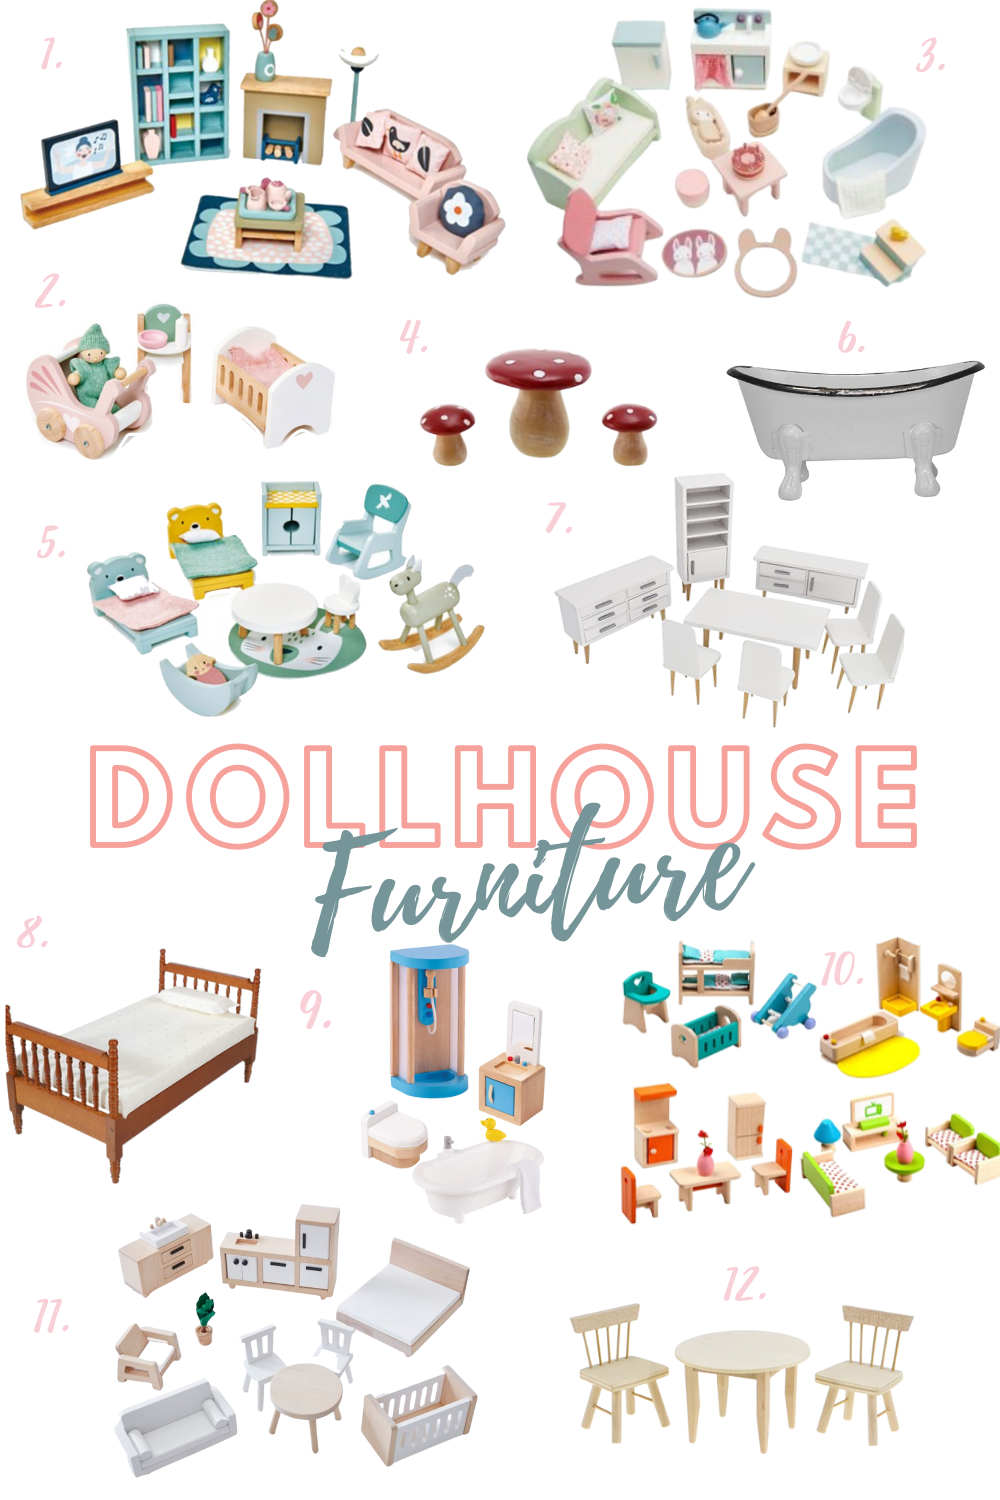 Adorable list of dollhouse furniture for refinishing a DIY dollhouse makeover; find the cutest dollhouse furniture sets!